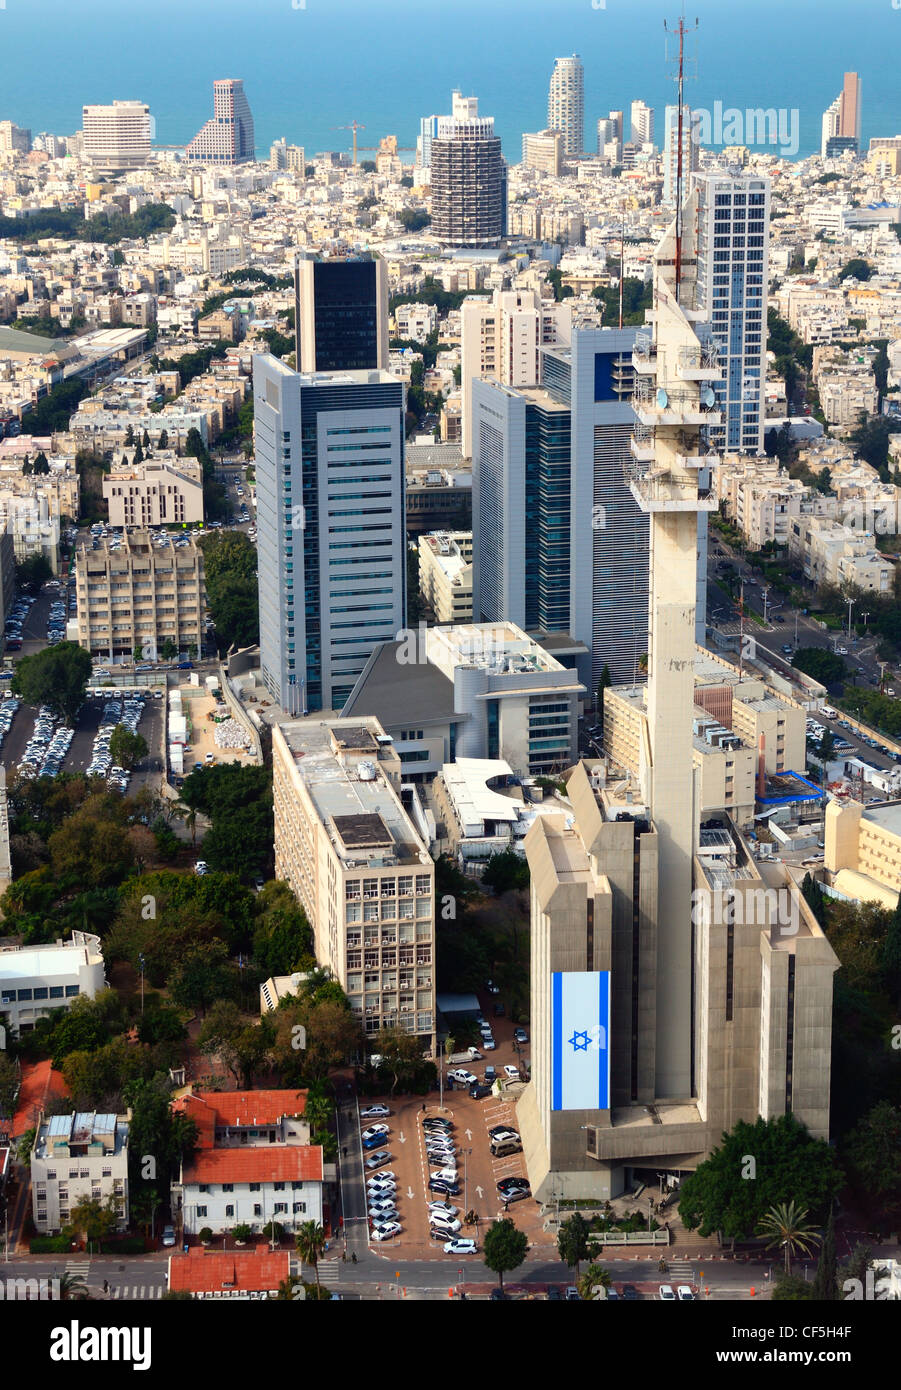 Aerial view of the City of Tel Aviv, Israel Stock Photo